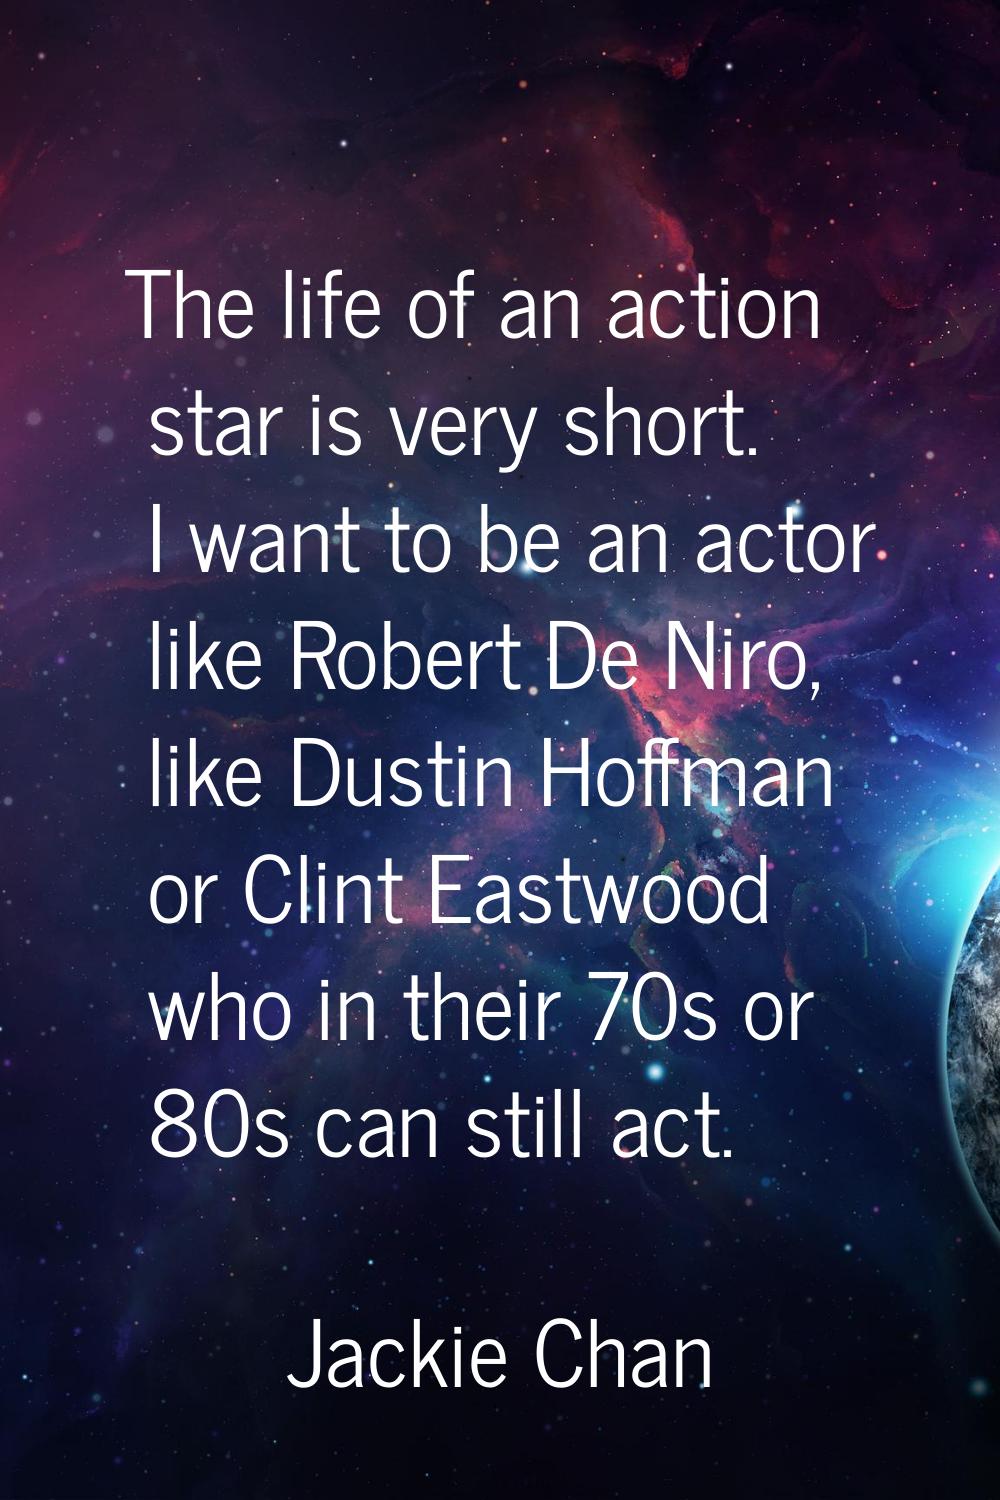 The life of an action star is very short. I want to be an actor like Robert De Niro, like Dustin Ho